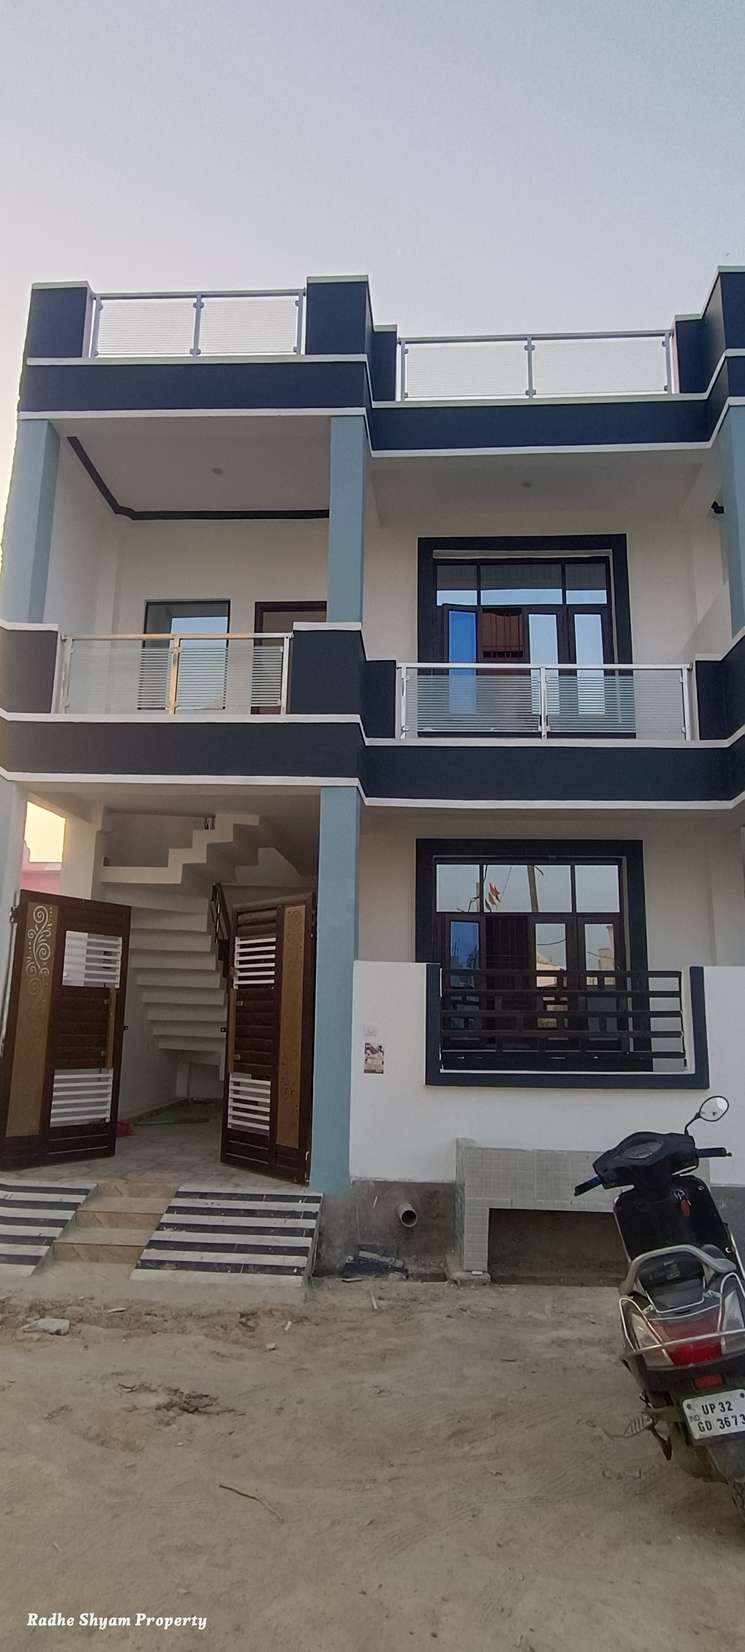 2 Bedroom 1000 Sq.Ft. Independent House in Kursi Road Lucknow